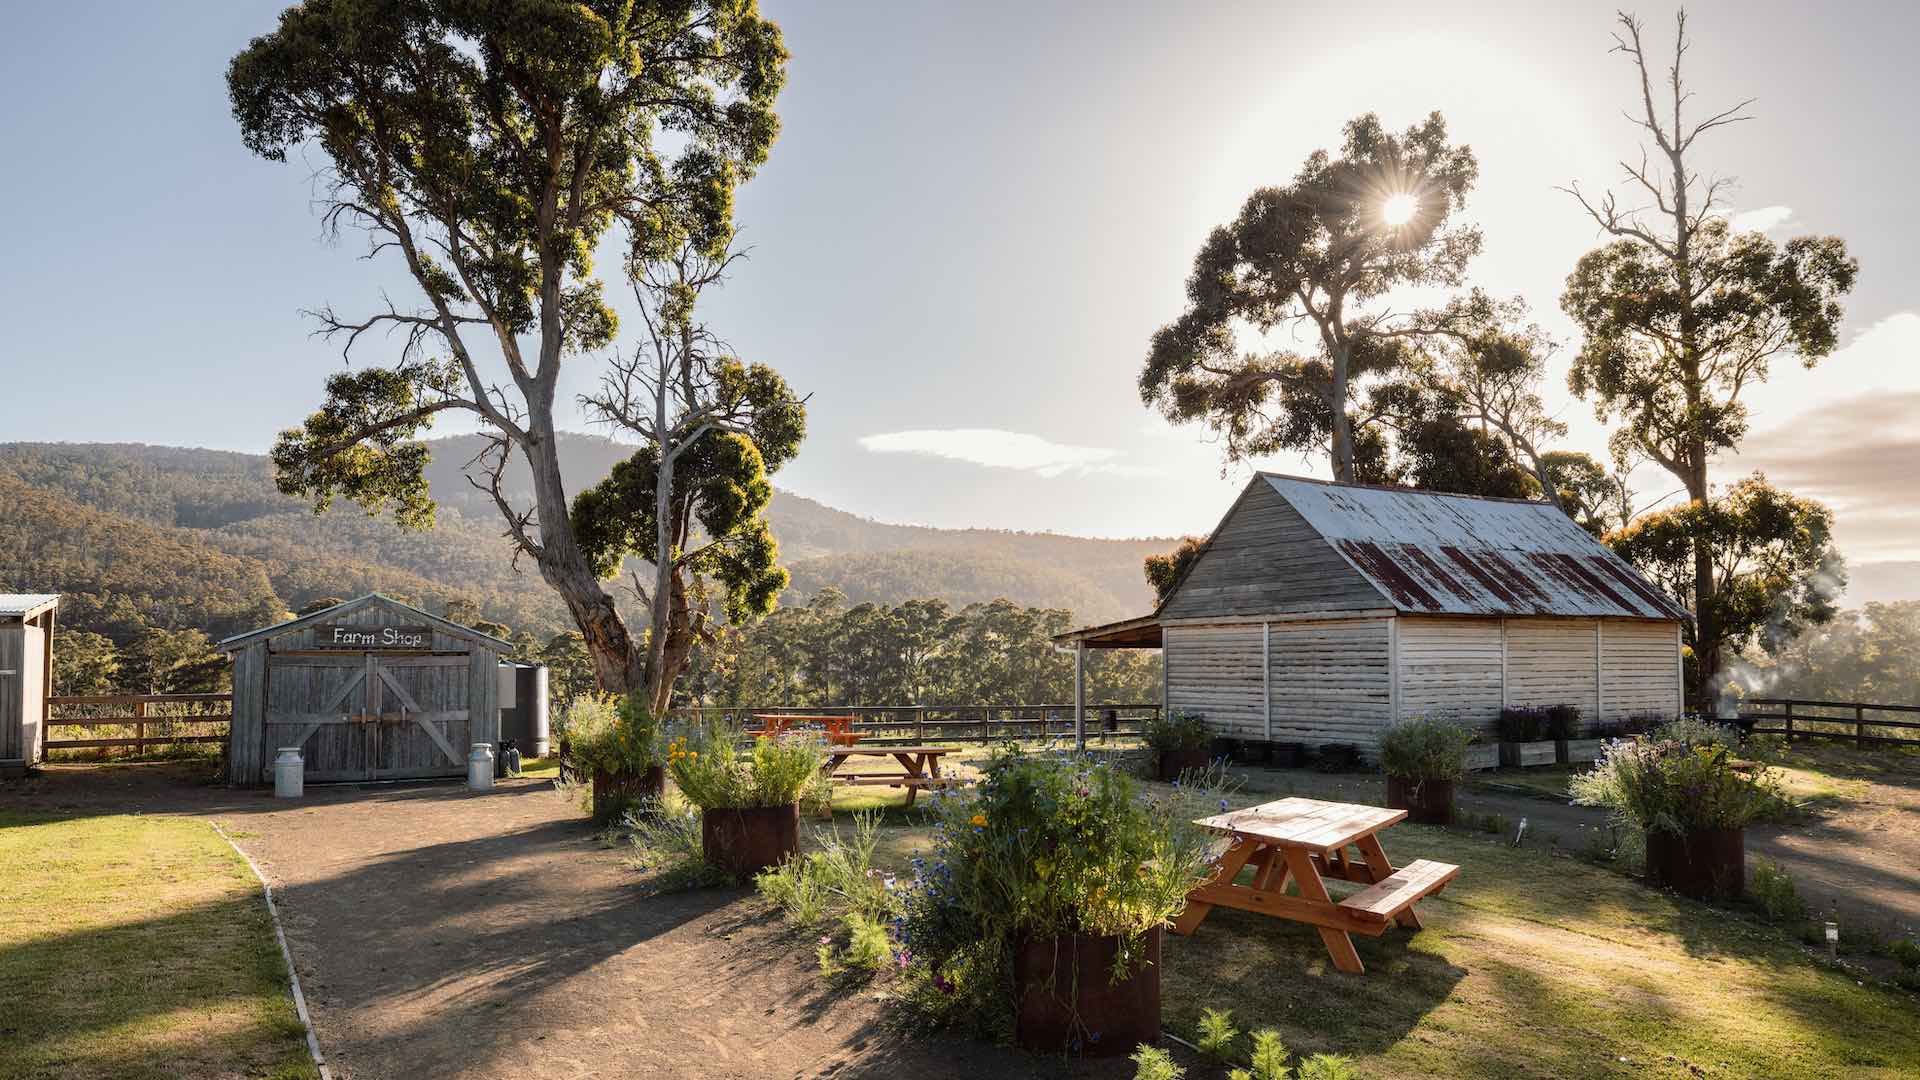 We're Giving Away the Ultimate Five-Day Foodie Holiday For Two to Tasmania